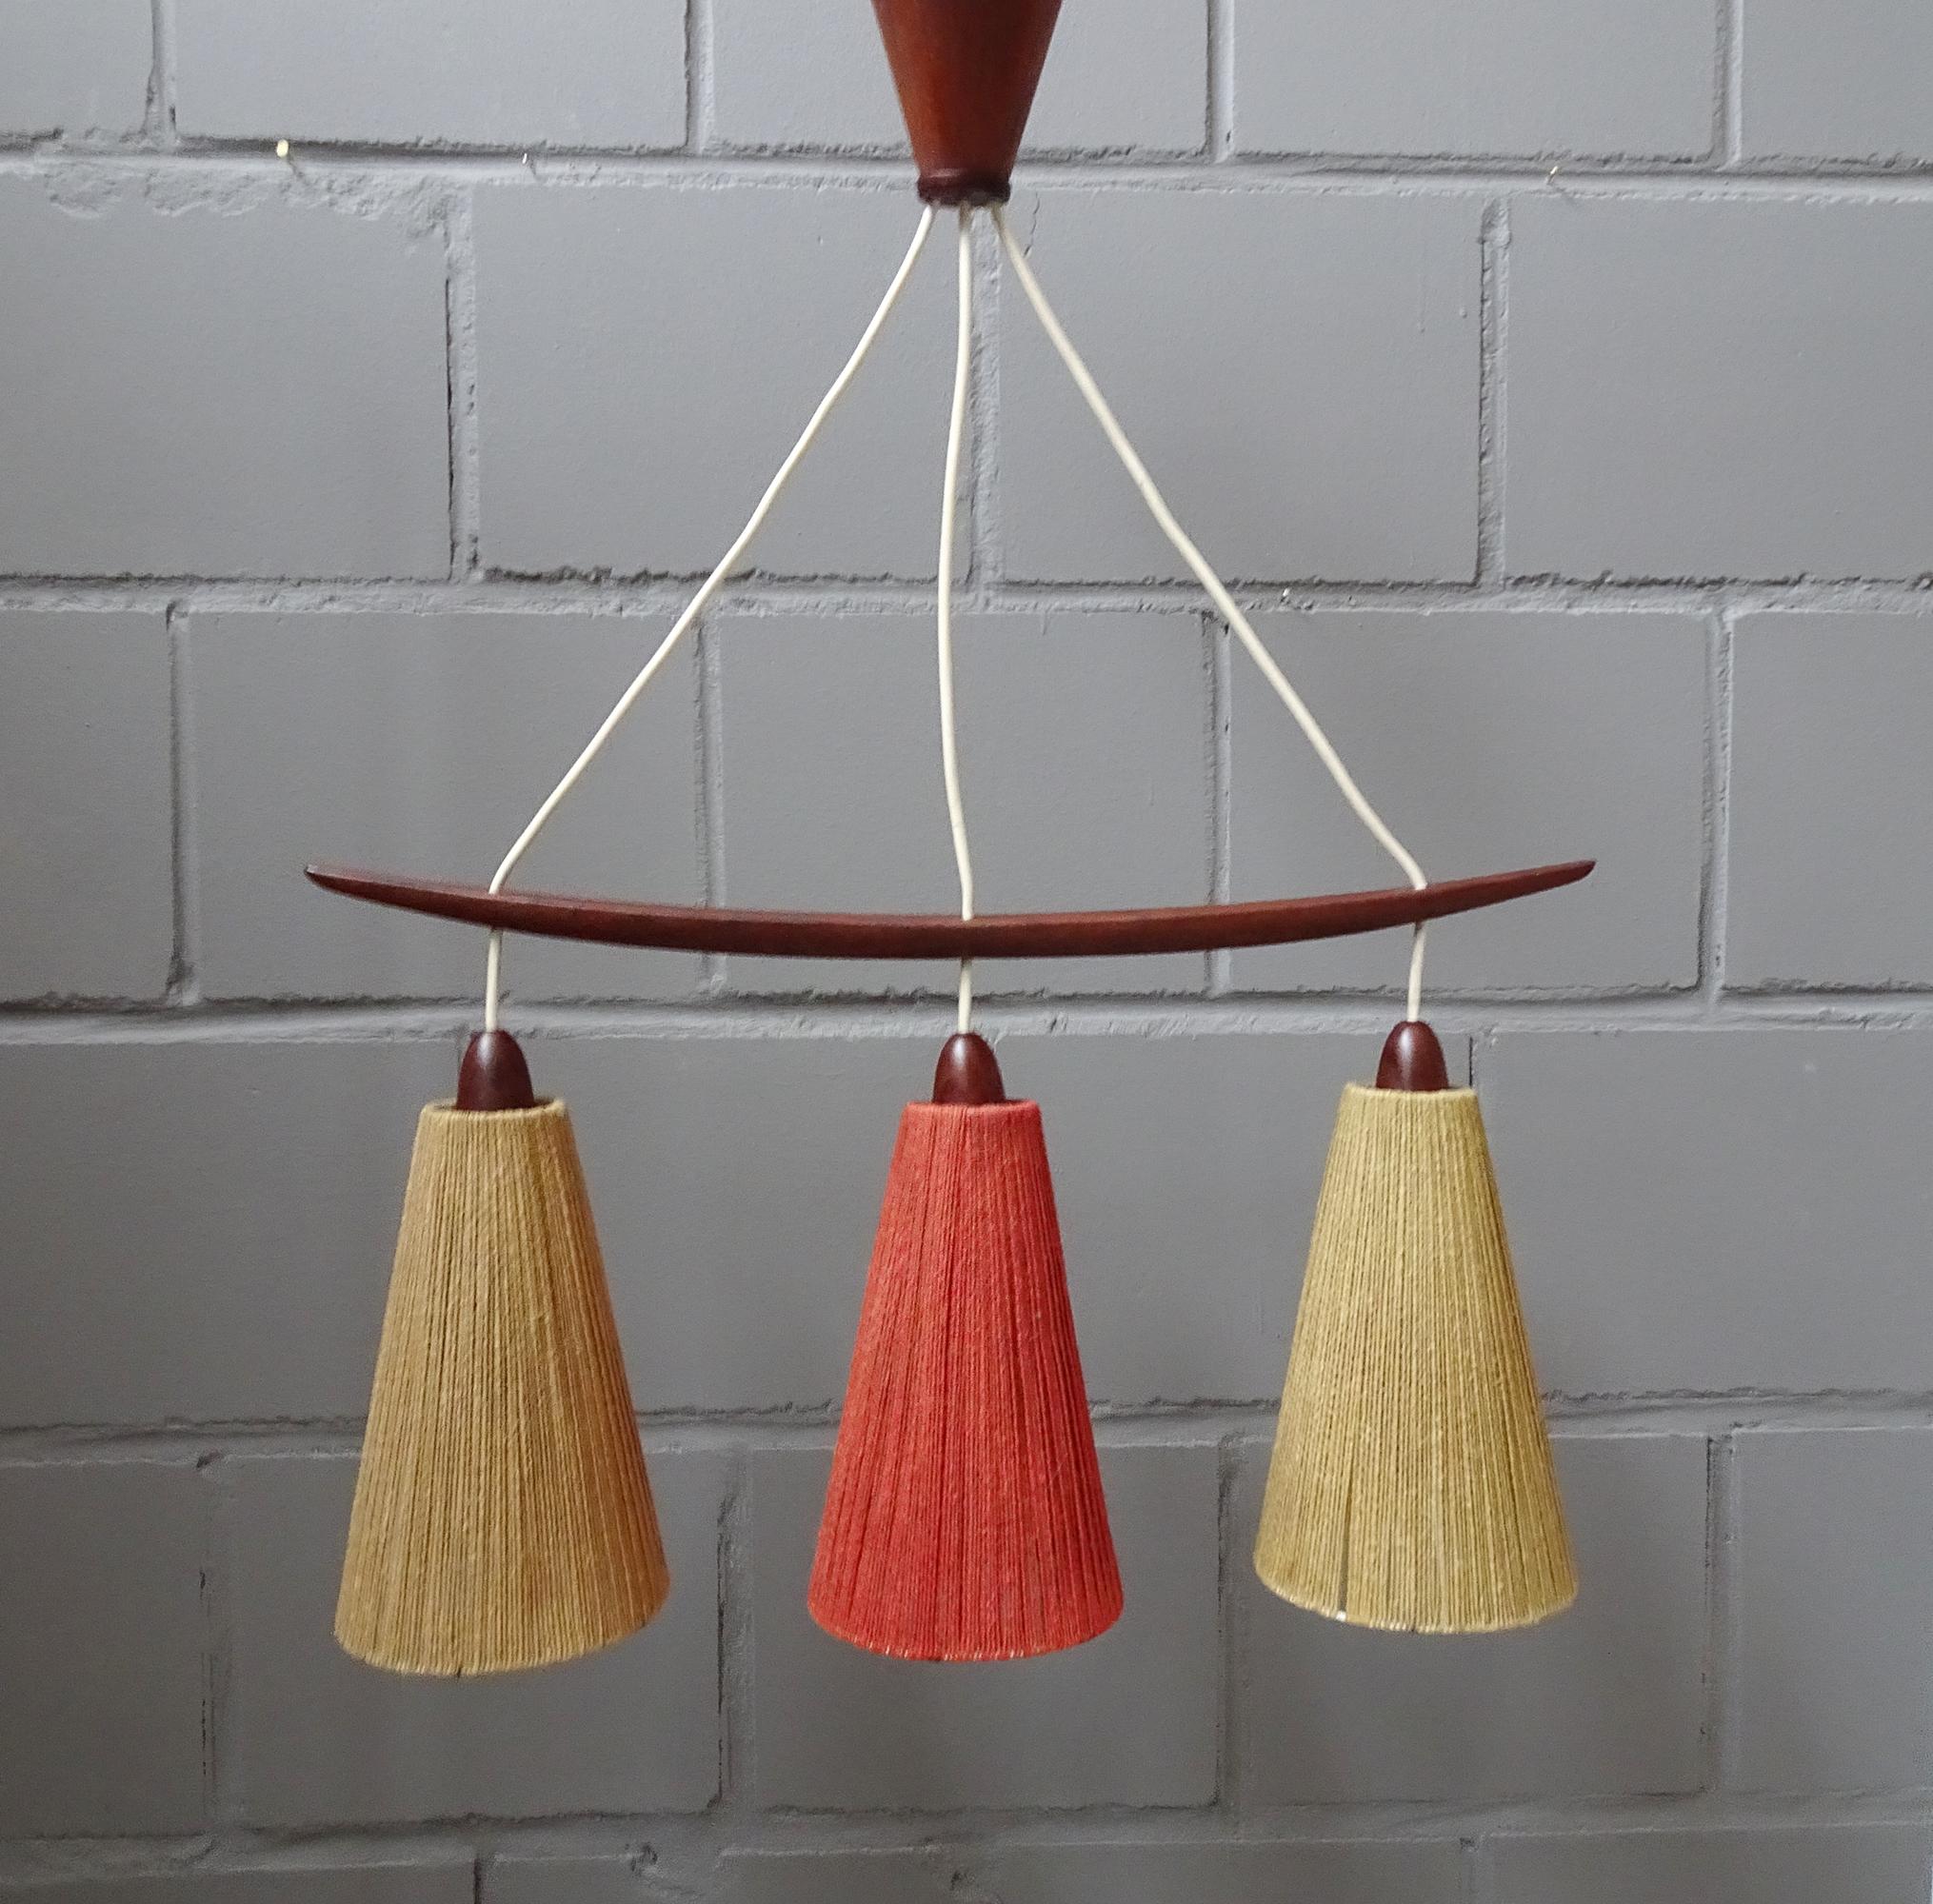 Stylish suspension lamp by Temde from the 1960s. Beautiful midcentury design in high quality workmanship and execution. Three-lamp hanging lamp with lampshades made of metal and a laced cover made of sisal in beige and wine red. The teak details